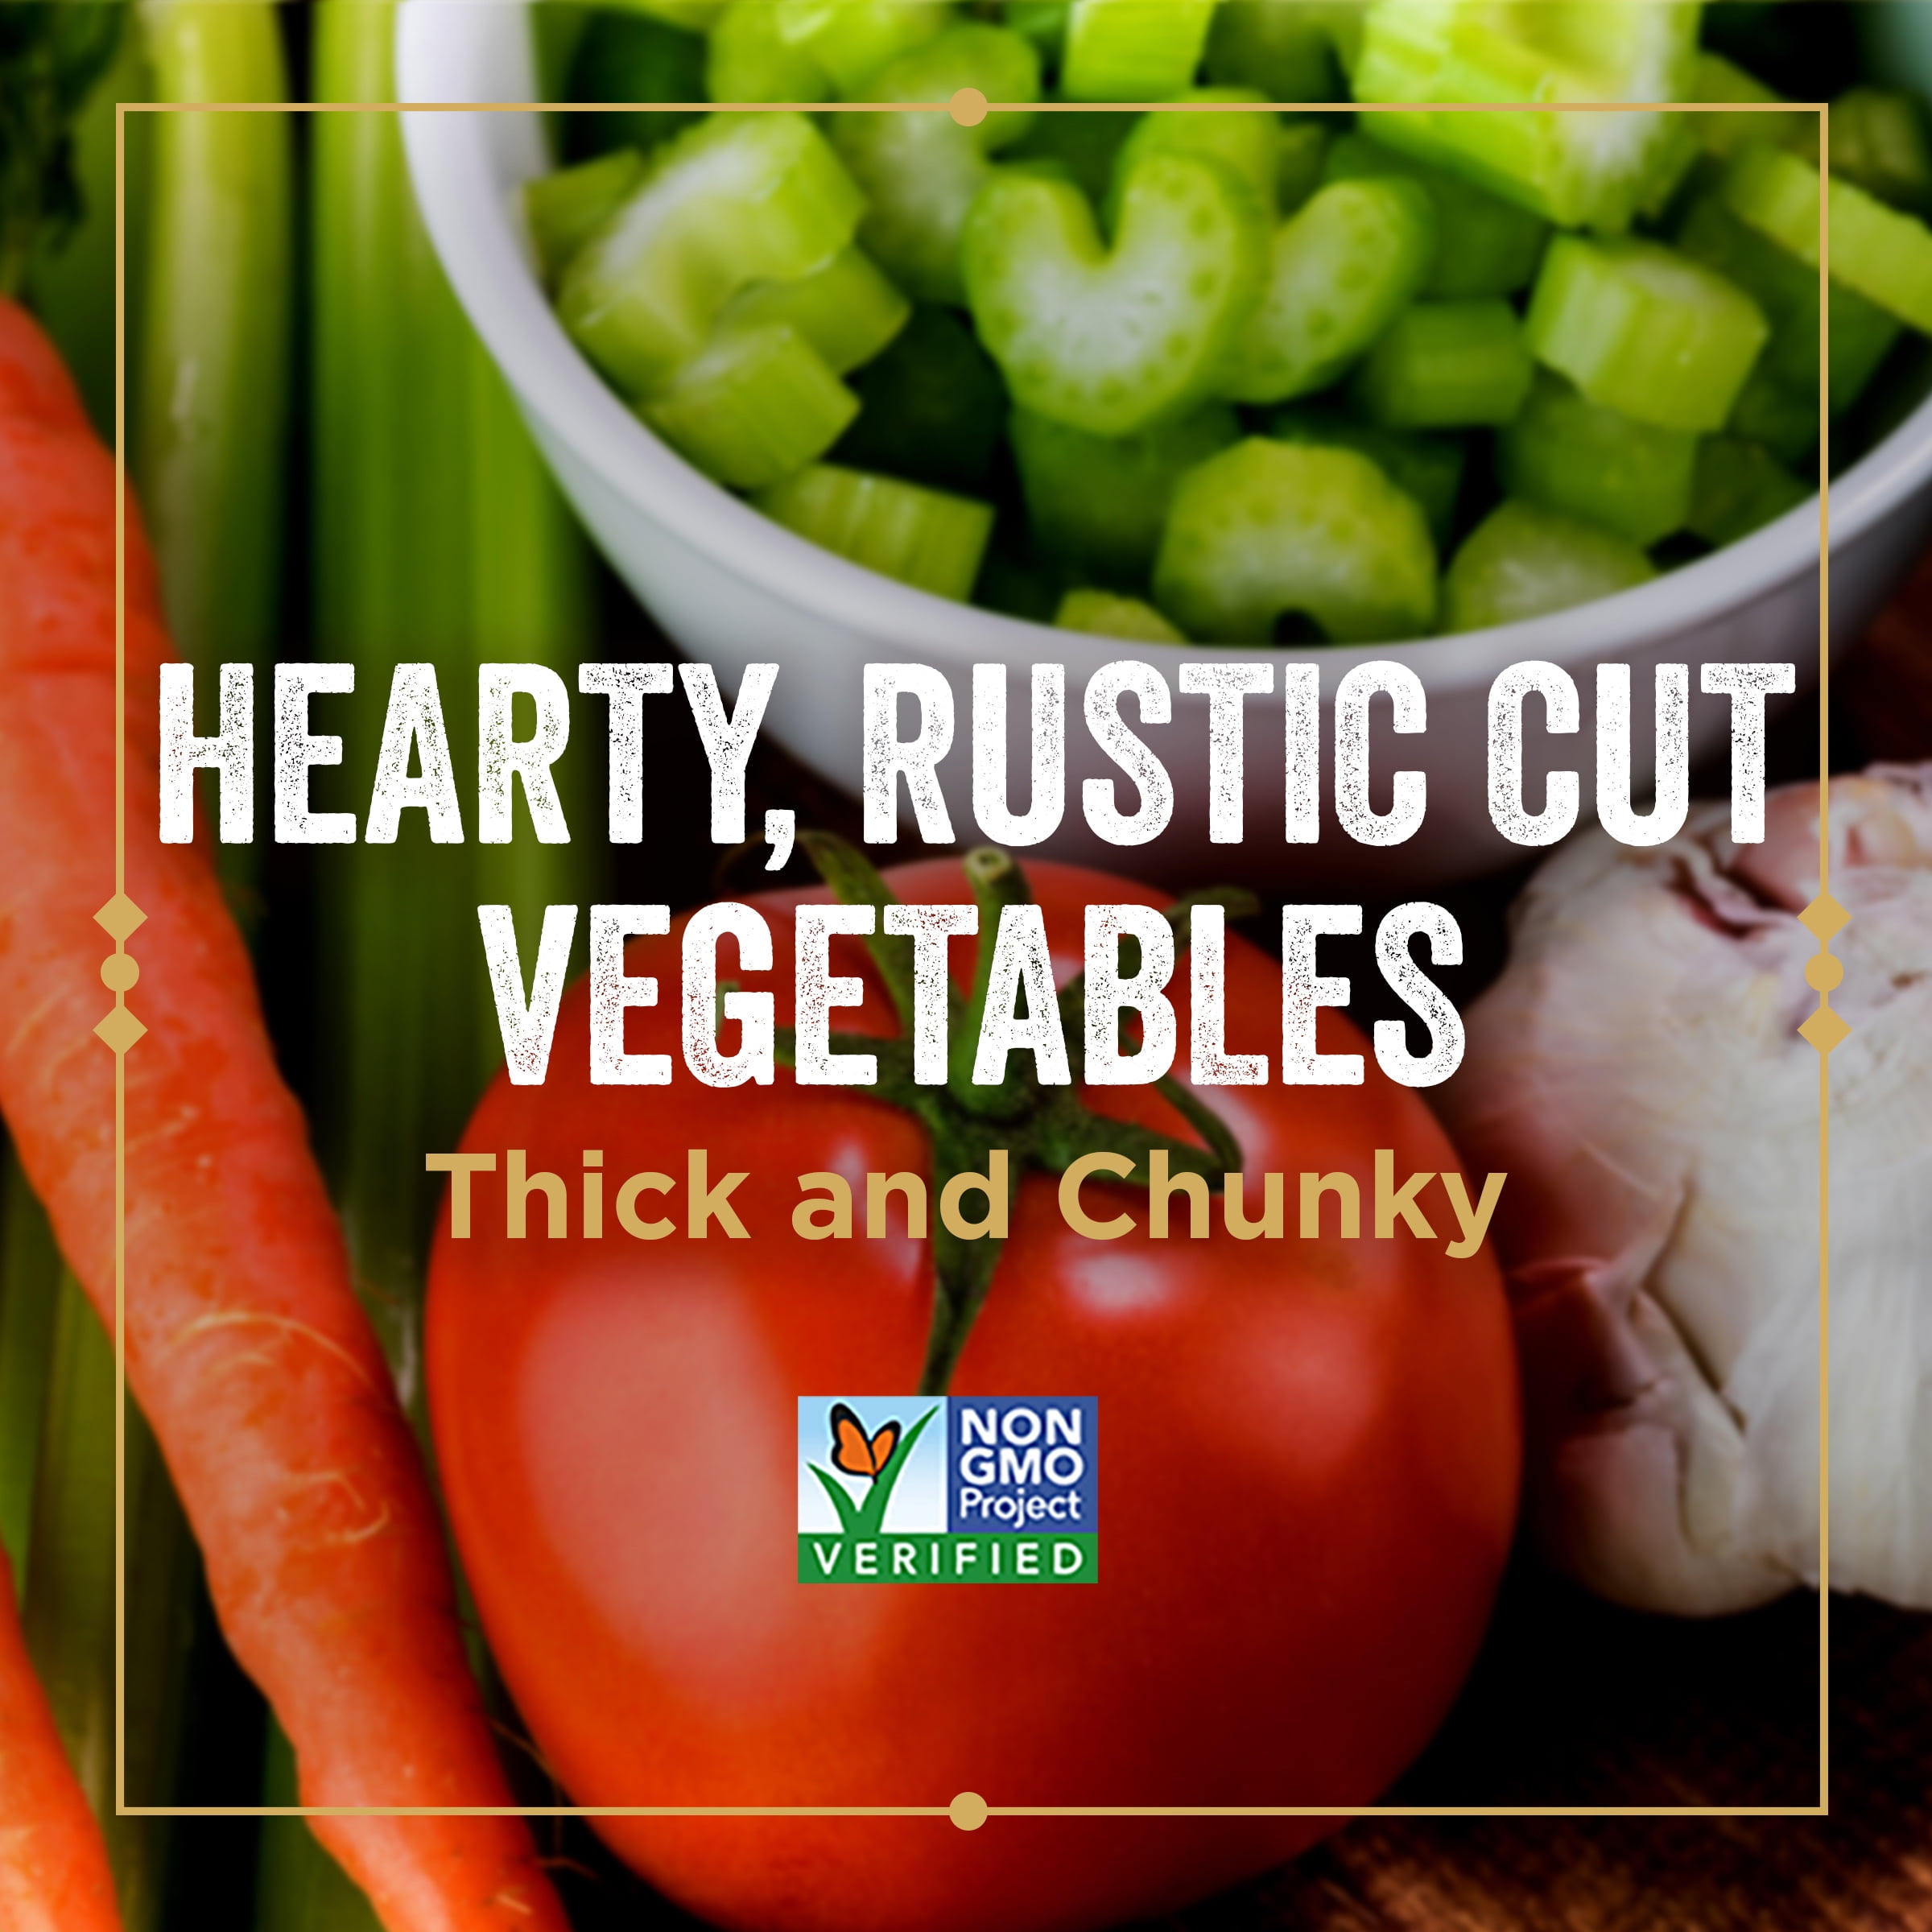 There's A Fancy Word For Rustic, Imprecise Vegetable Cuts